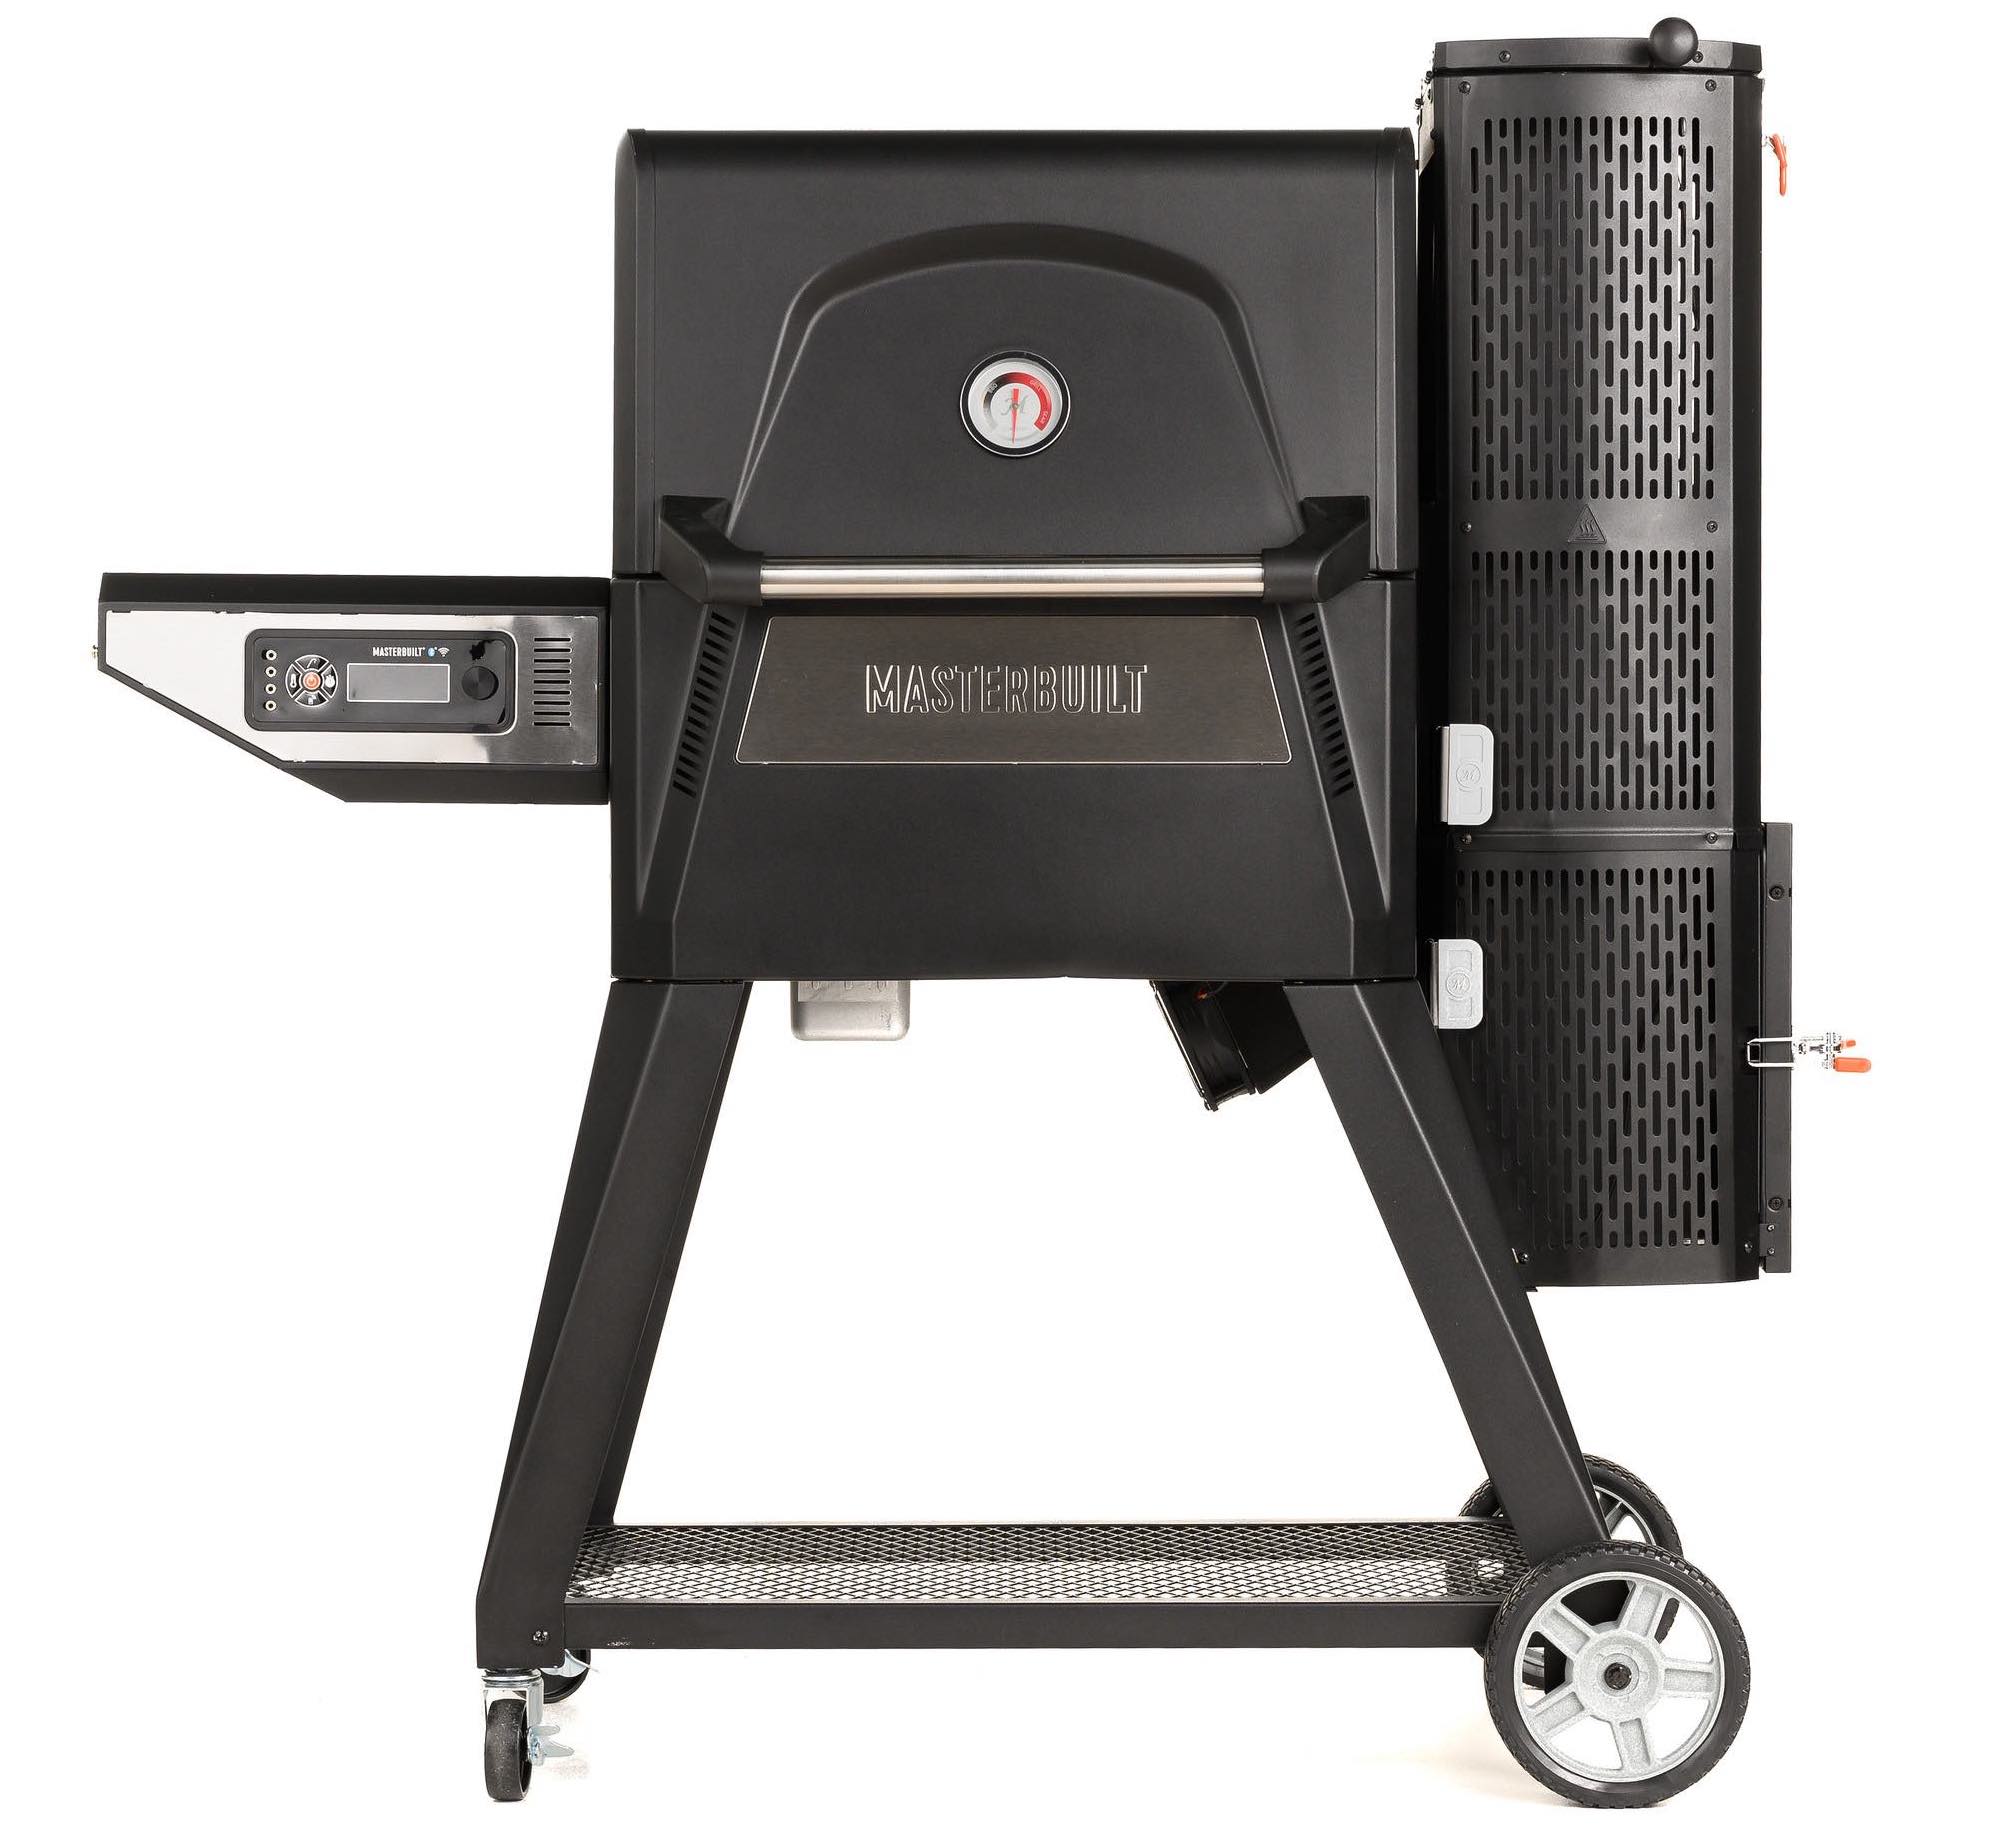 Masterbuilt Gravity Series 560 Digital Charcoal Grill and Smoker Combo - image 1 of 13